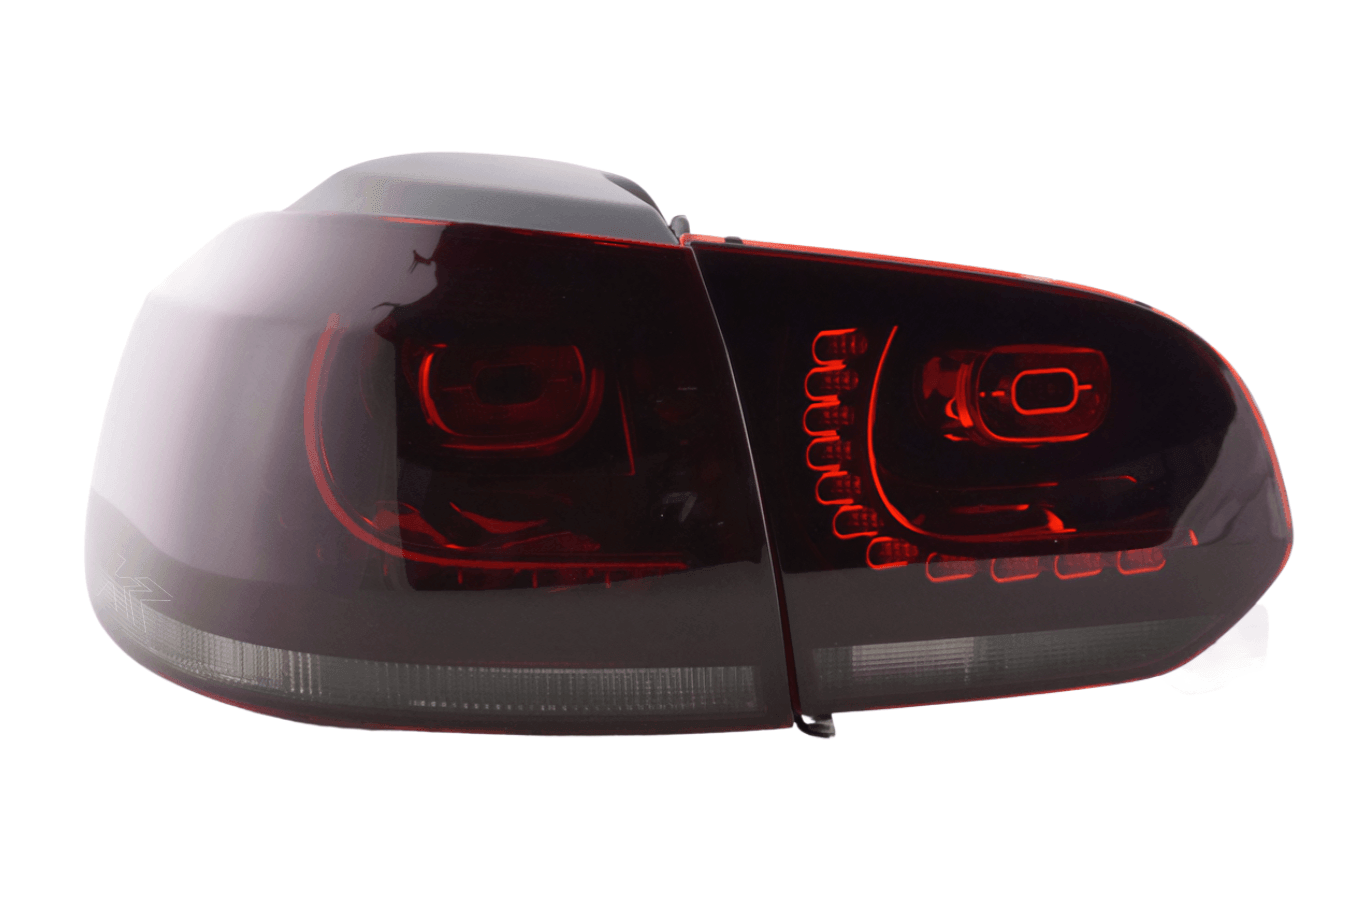 VW Golf Mk6 GTI Red/Smoked - R Look - Upgrade Tail Lights (2008-2014) - K2 Industries